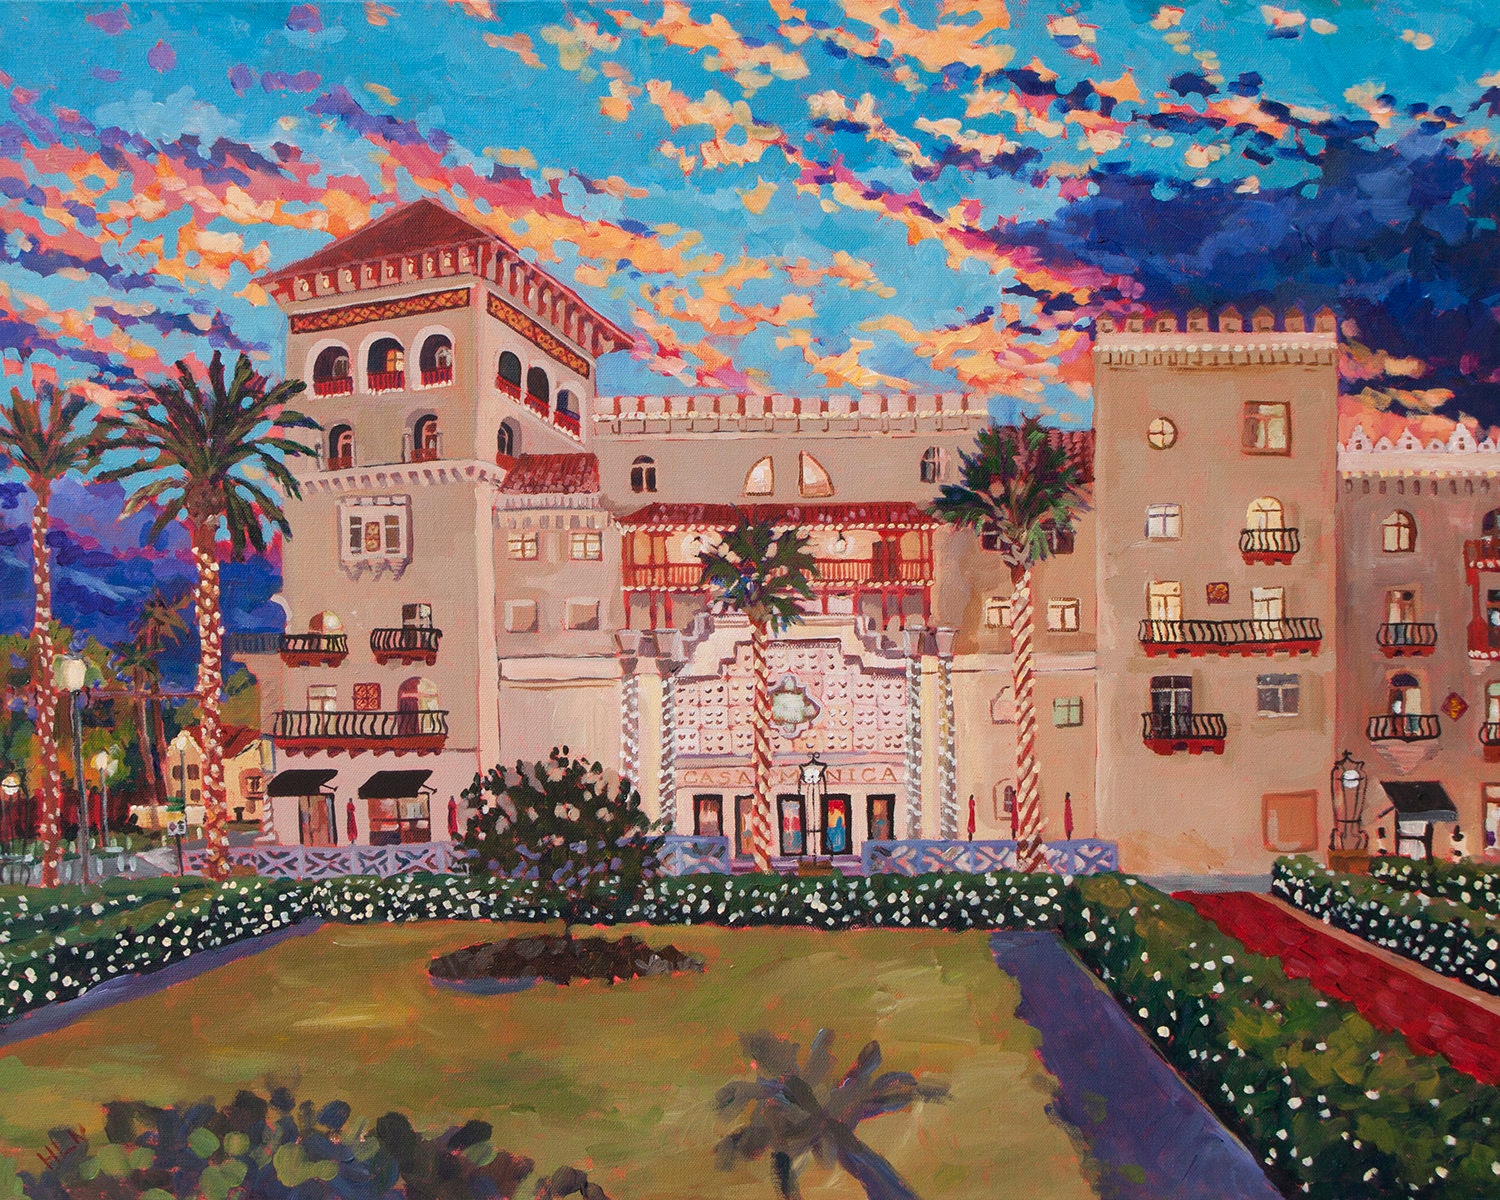 Painting of historic St. Augustine of the Casa Monica Hotel at sunset